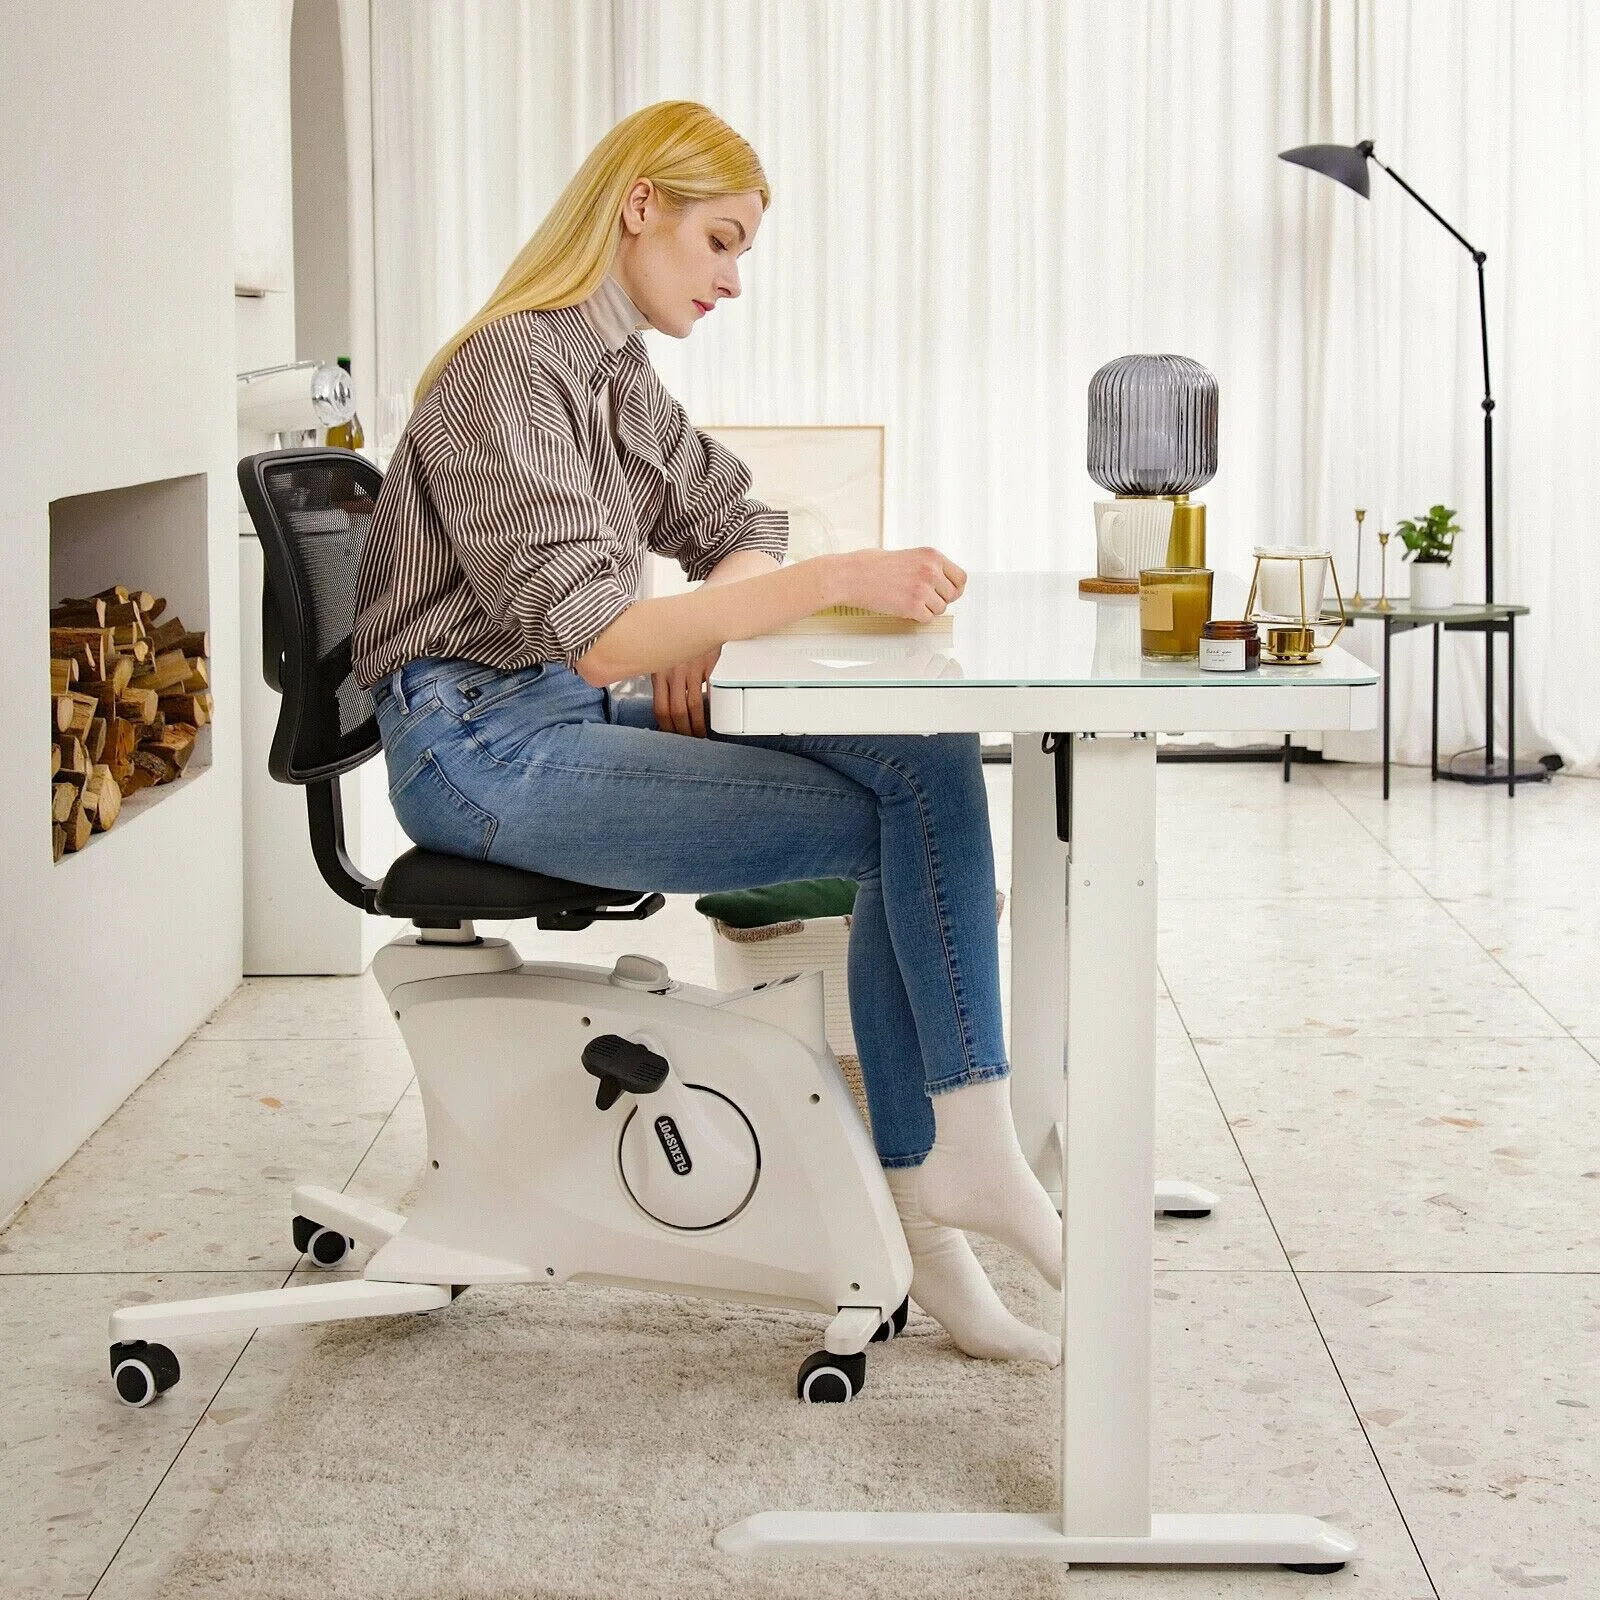 FlexiSpot Adjustable Exercise Workstation Bike Desk Chair Fitness Chair Standing Desk Cycle with Mesh Back Desk Chair